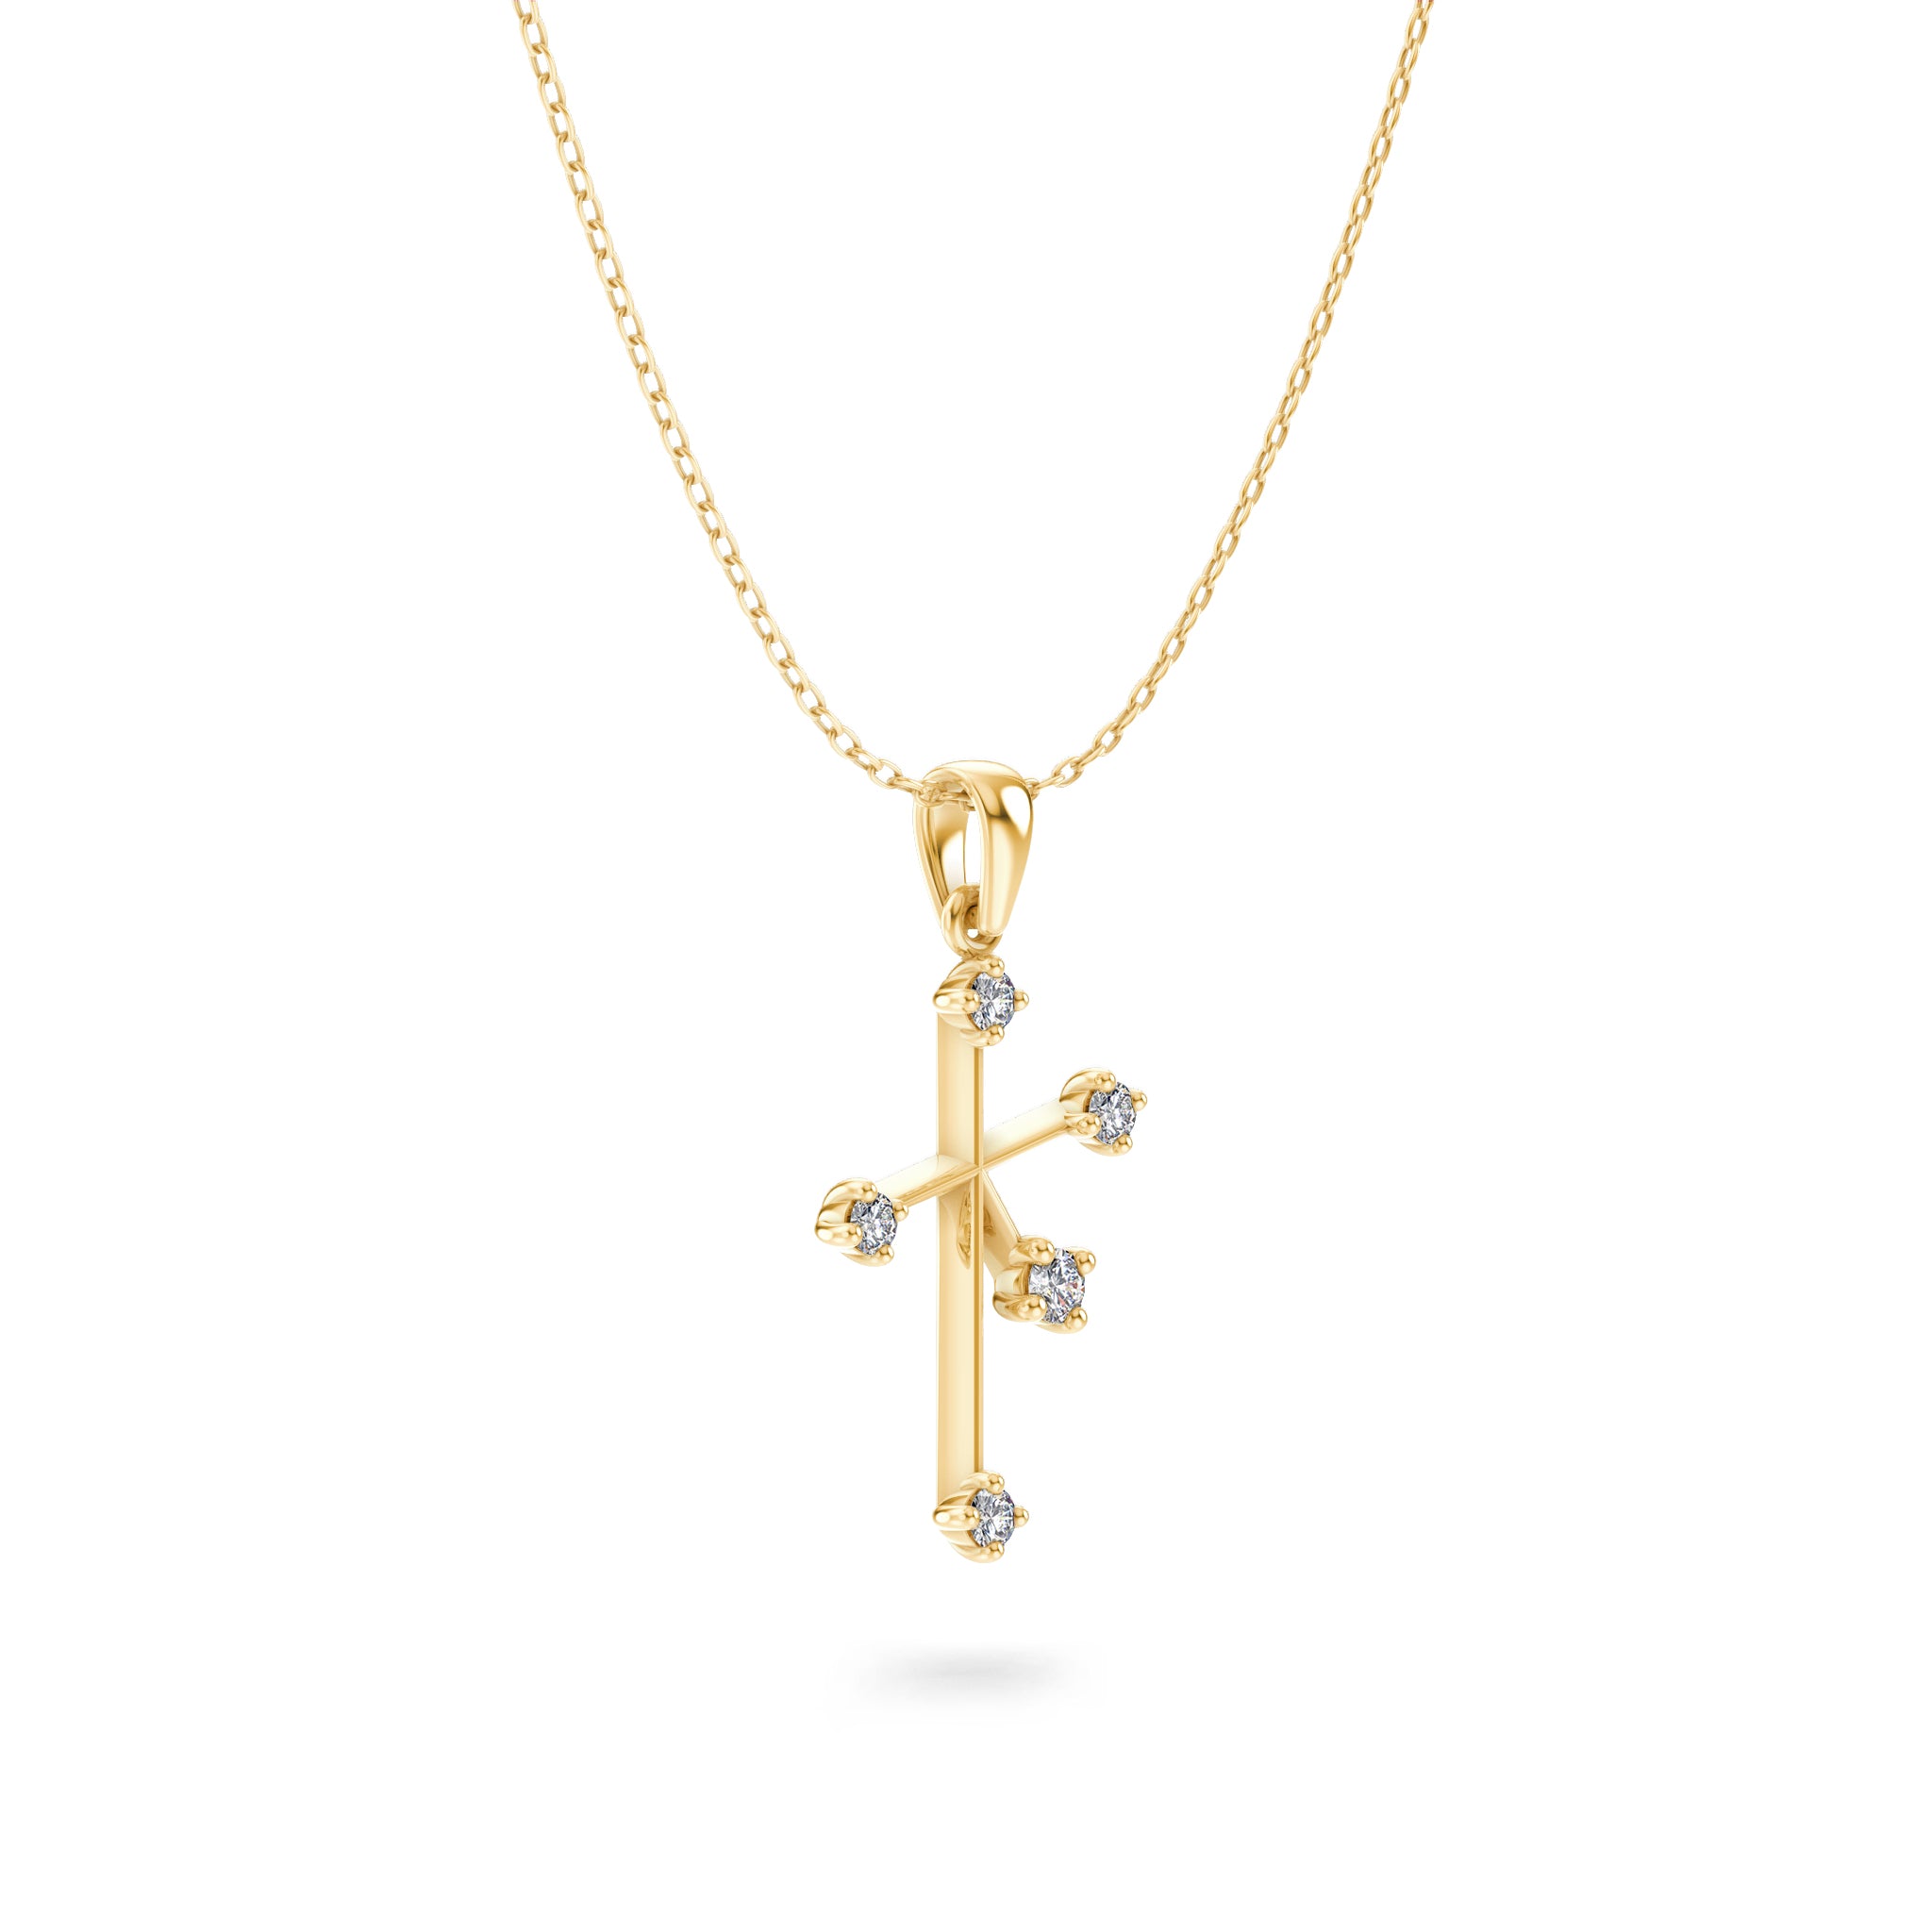 Shimansky - Southern Cross Small Diamond Pendant Crafted in 14K Yellow Gold